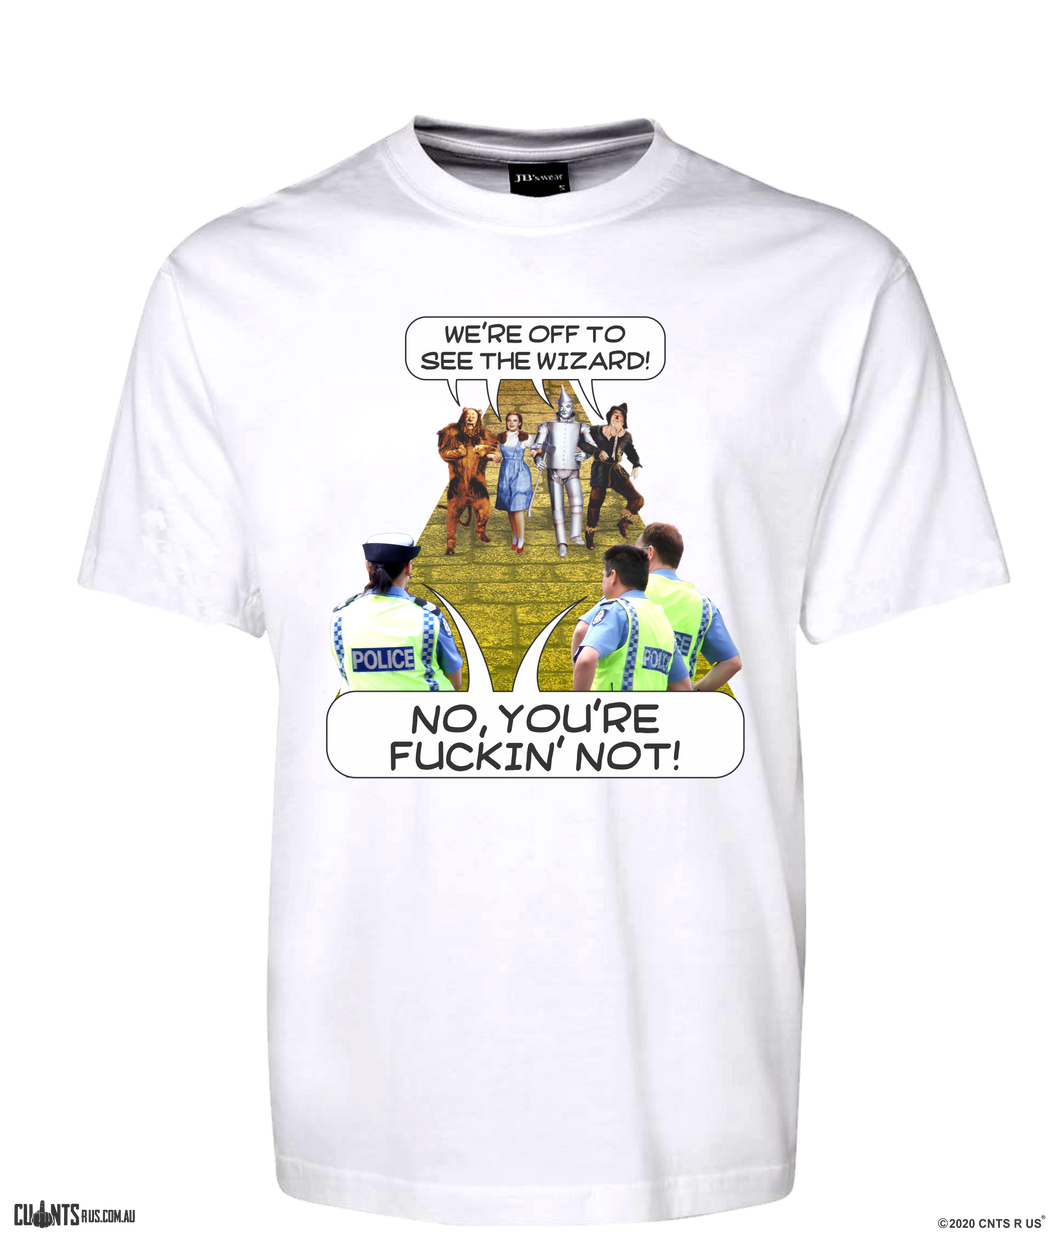 We're Off To See The Wizard T-Shirt Adult Tee Police No You're Fuckin Not CRU01-1HT-24022